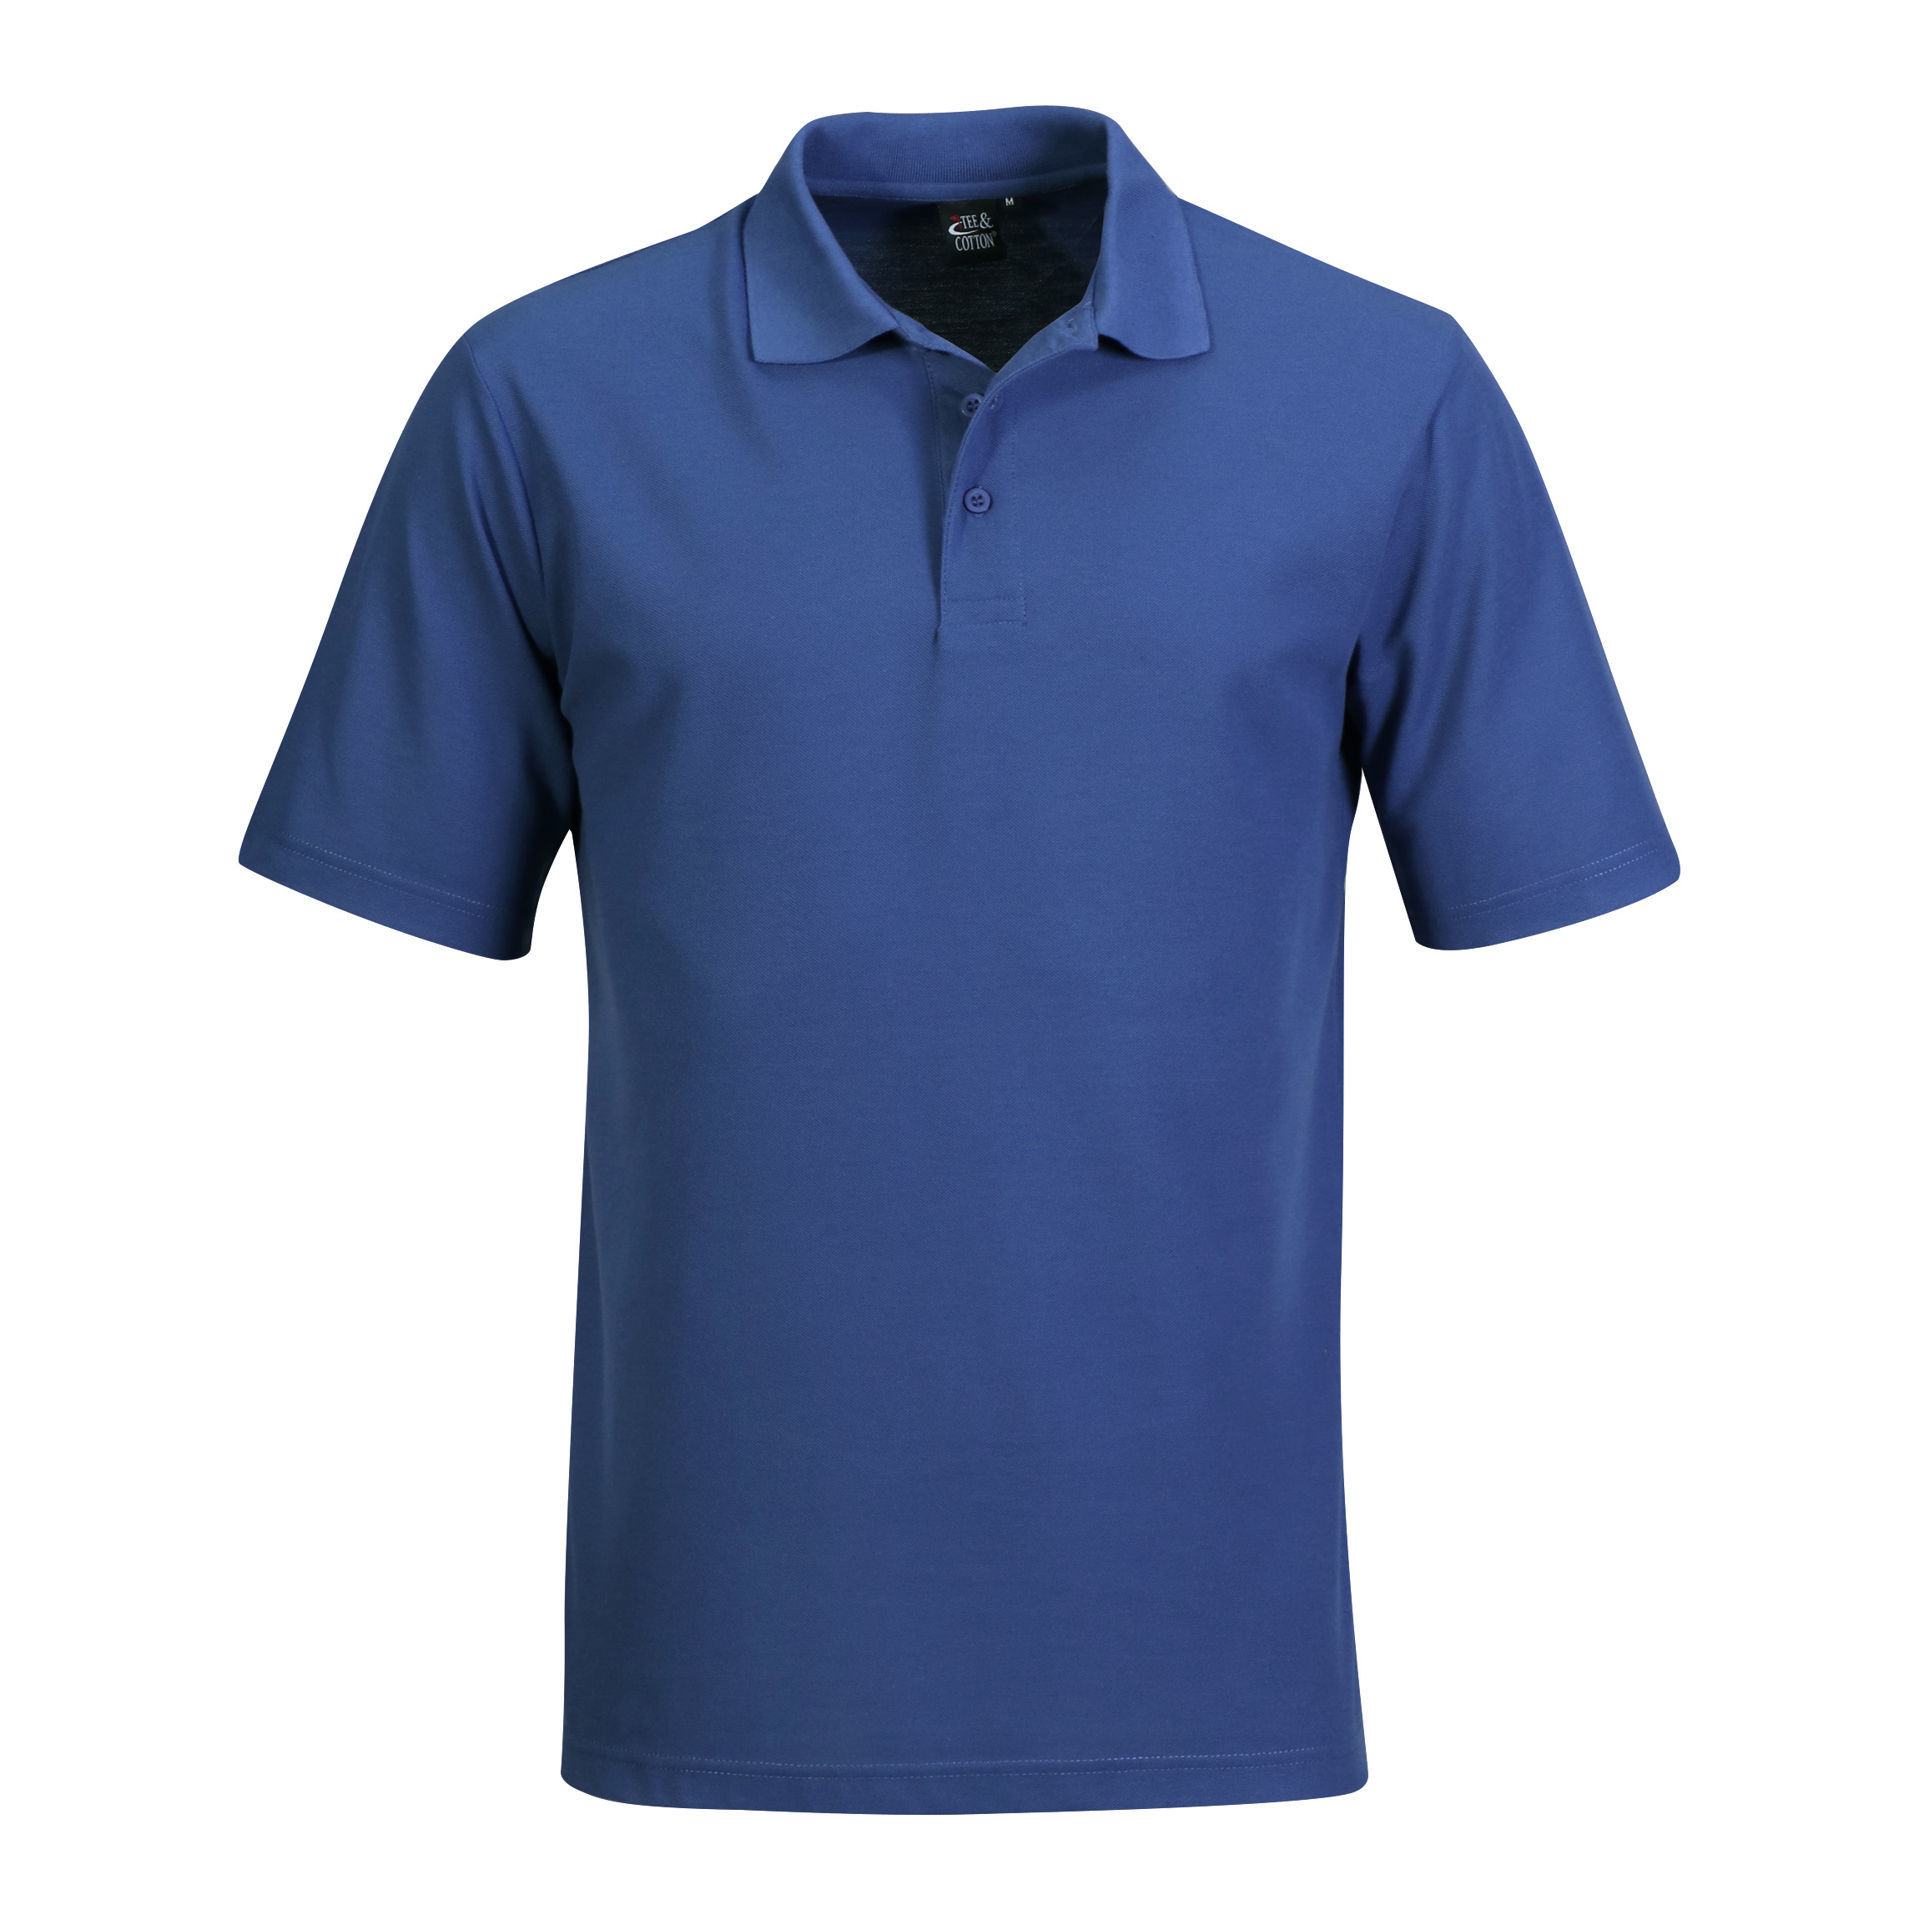 Proactive Clothing - Classic Pique Knit Polo